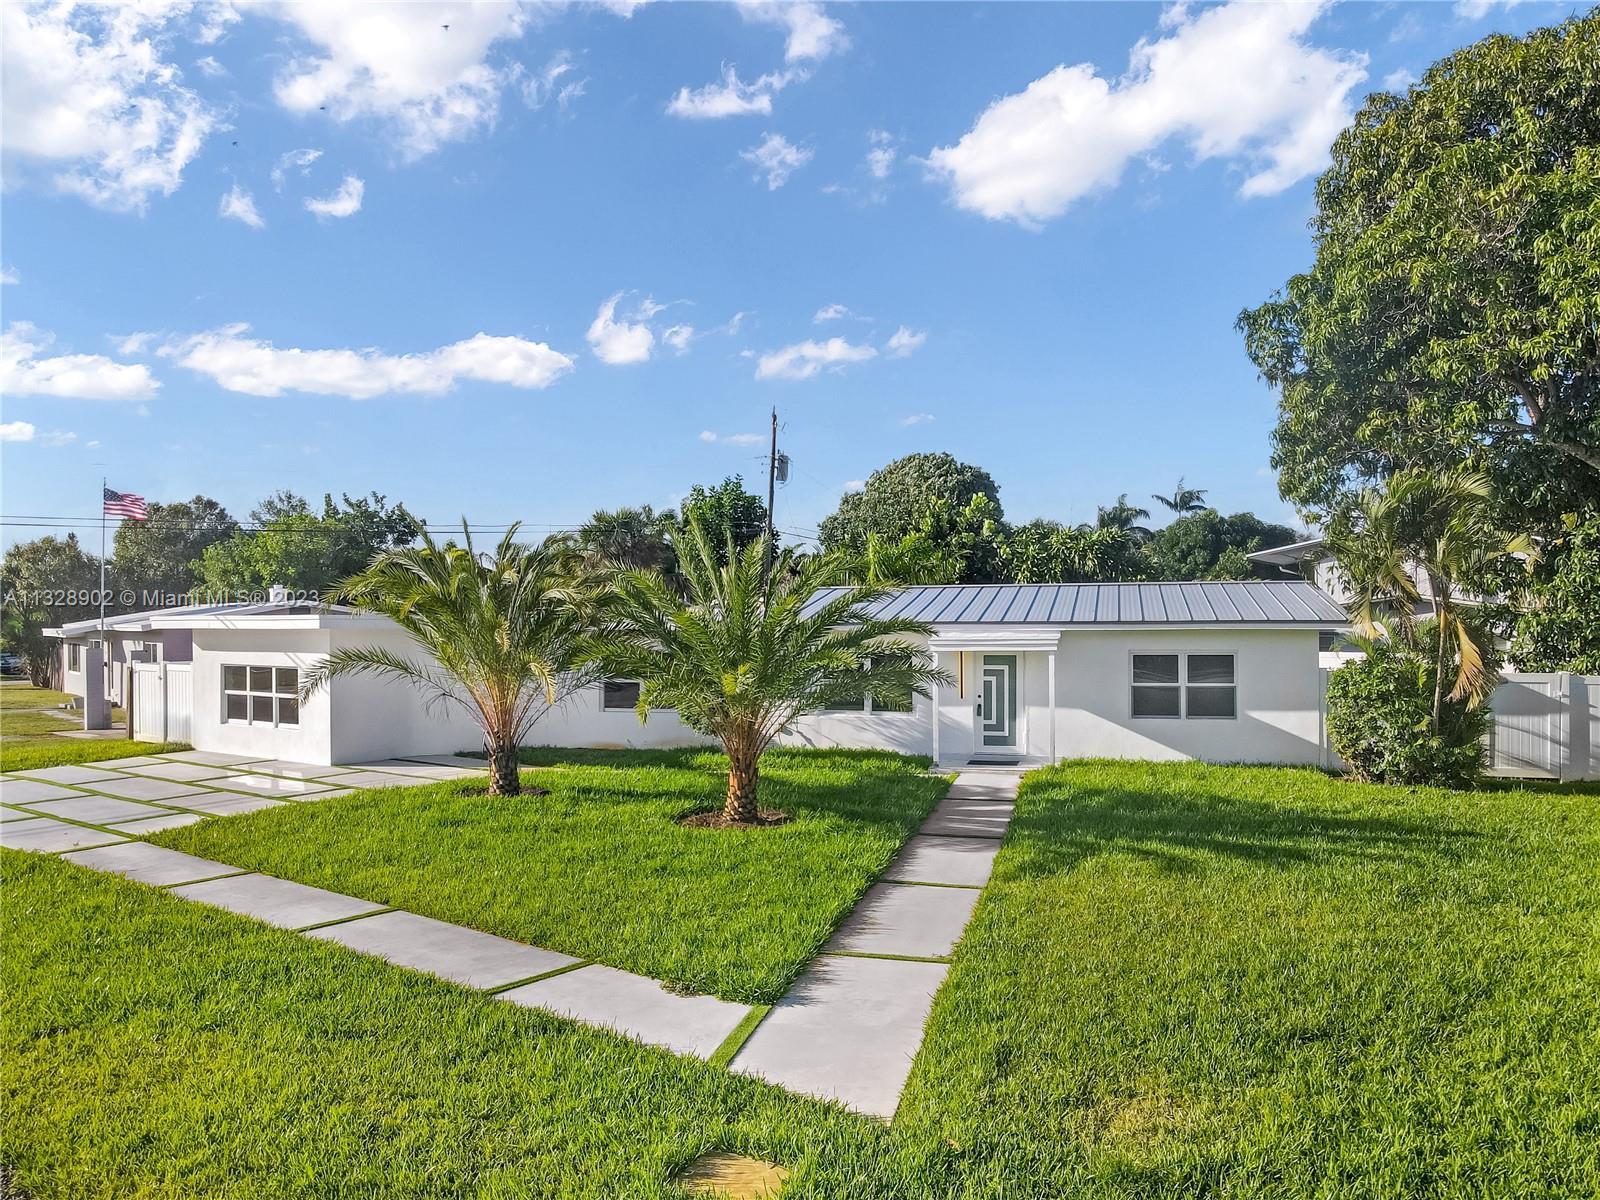 Completely Remodeled 4 bedrooms 3 bathroom home in the beautiful Wilton Manors neighborhood. All new